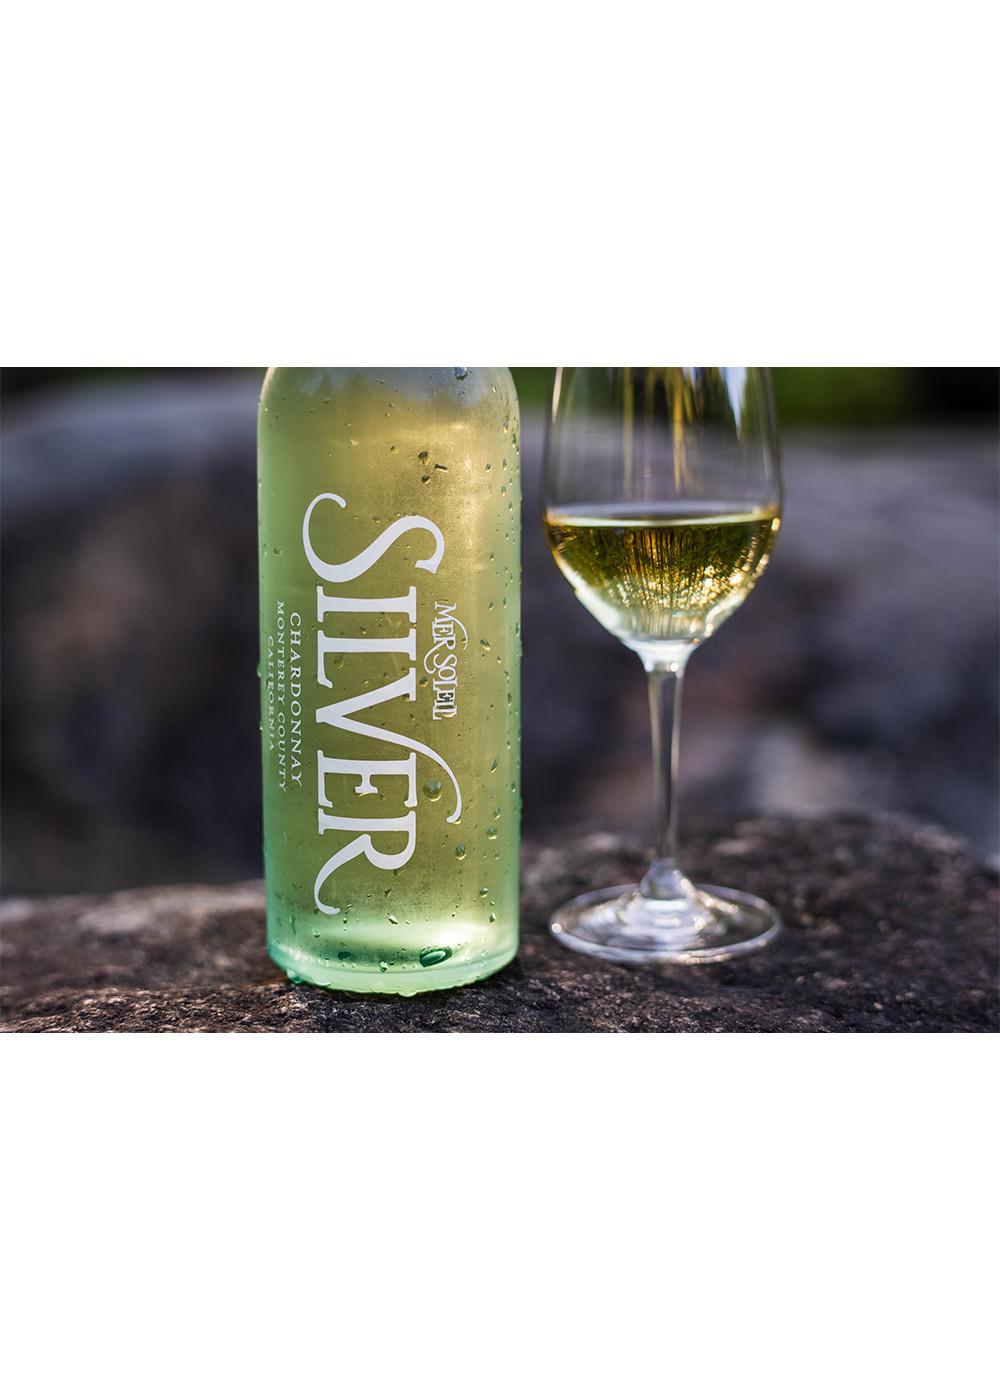 Mer Soleil Silver Unoaked Chardonnay; image 2 of 3